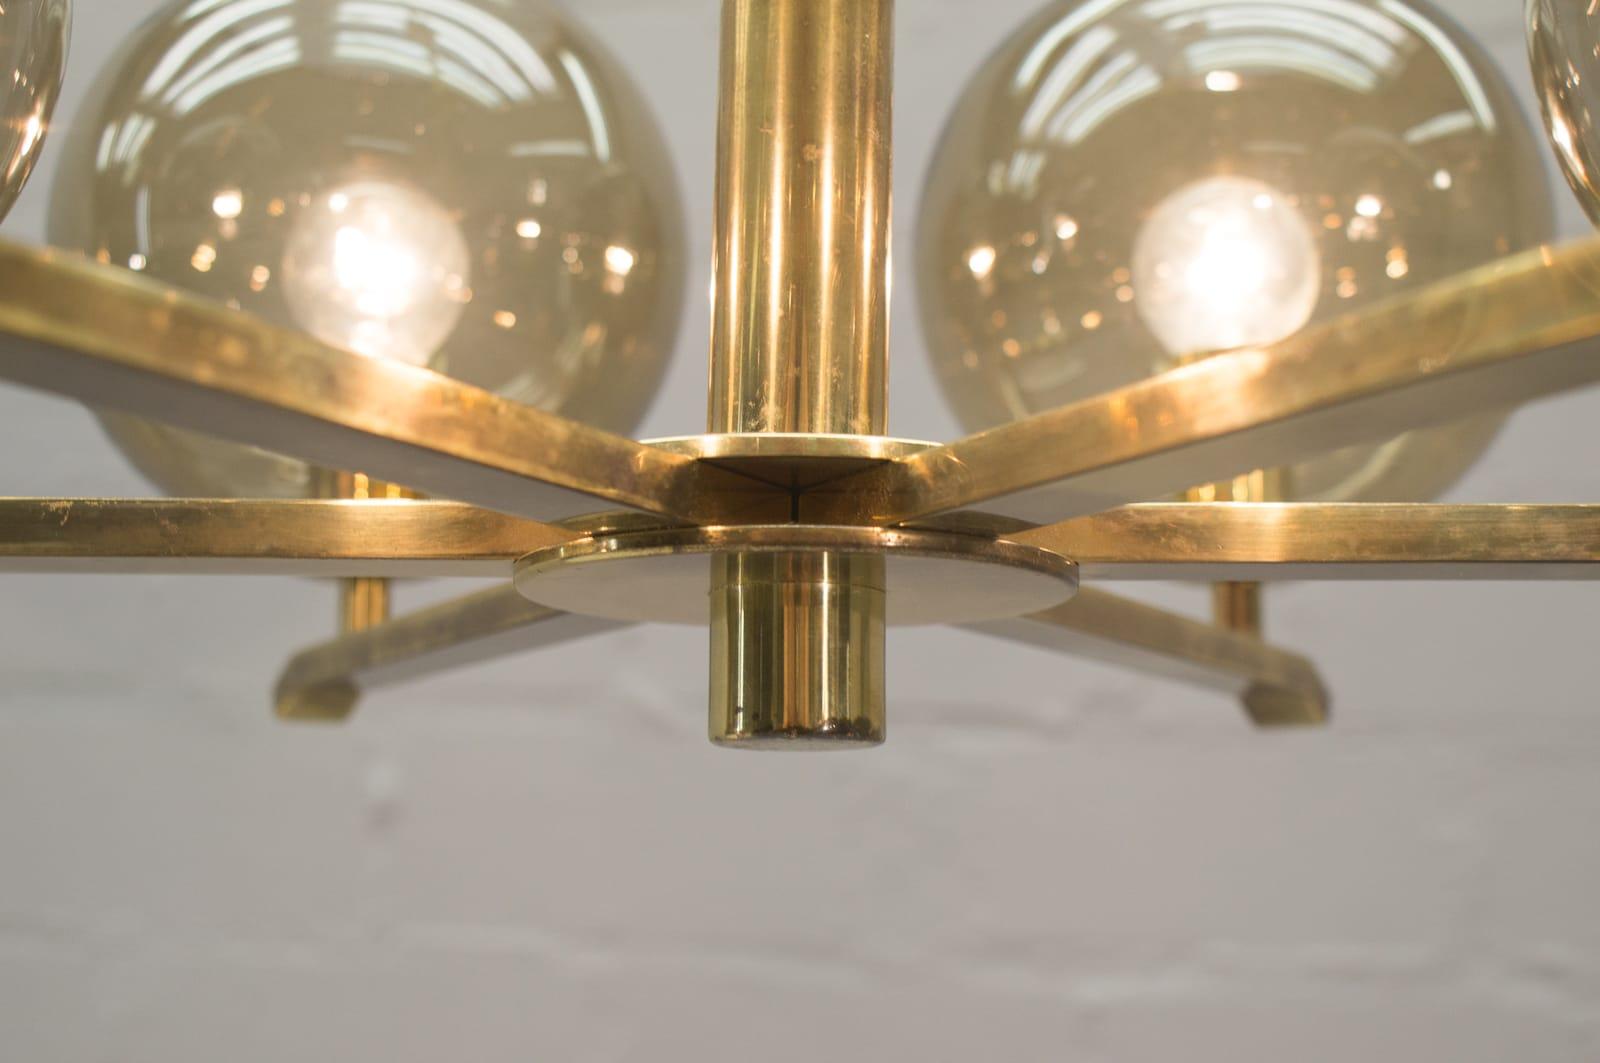 Elegant 1960s Brass Ceiling Lamp with 8 Smoked Glass Globes, Germany For Sale 8